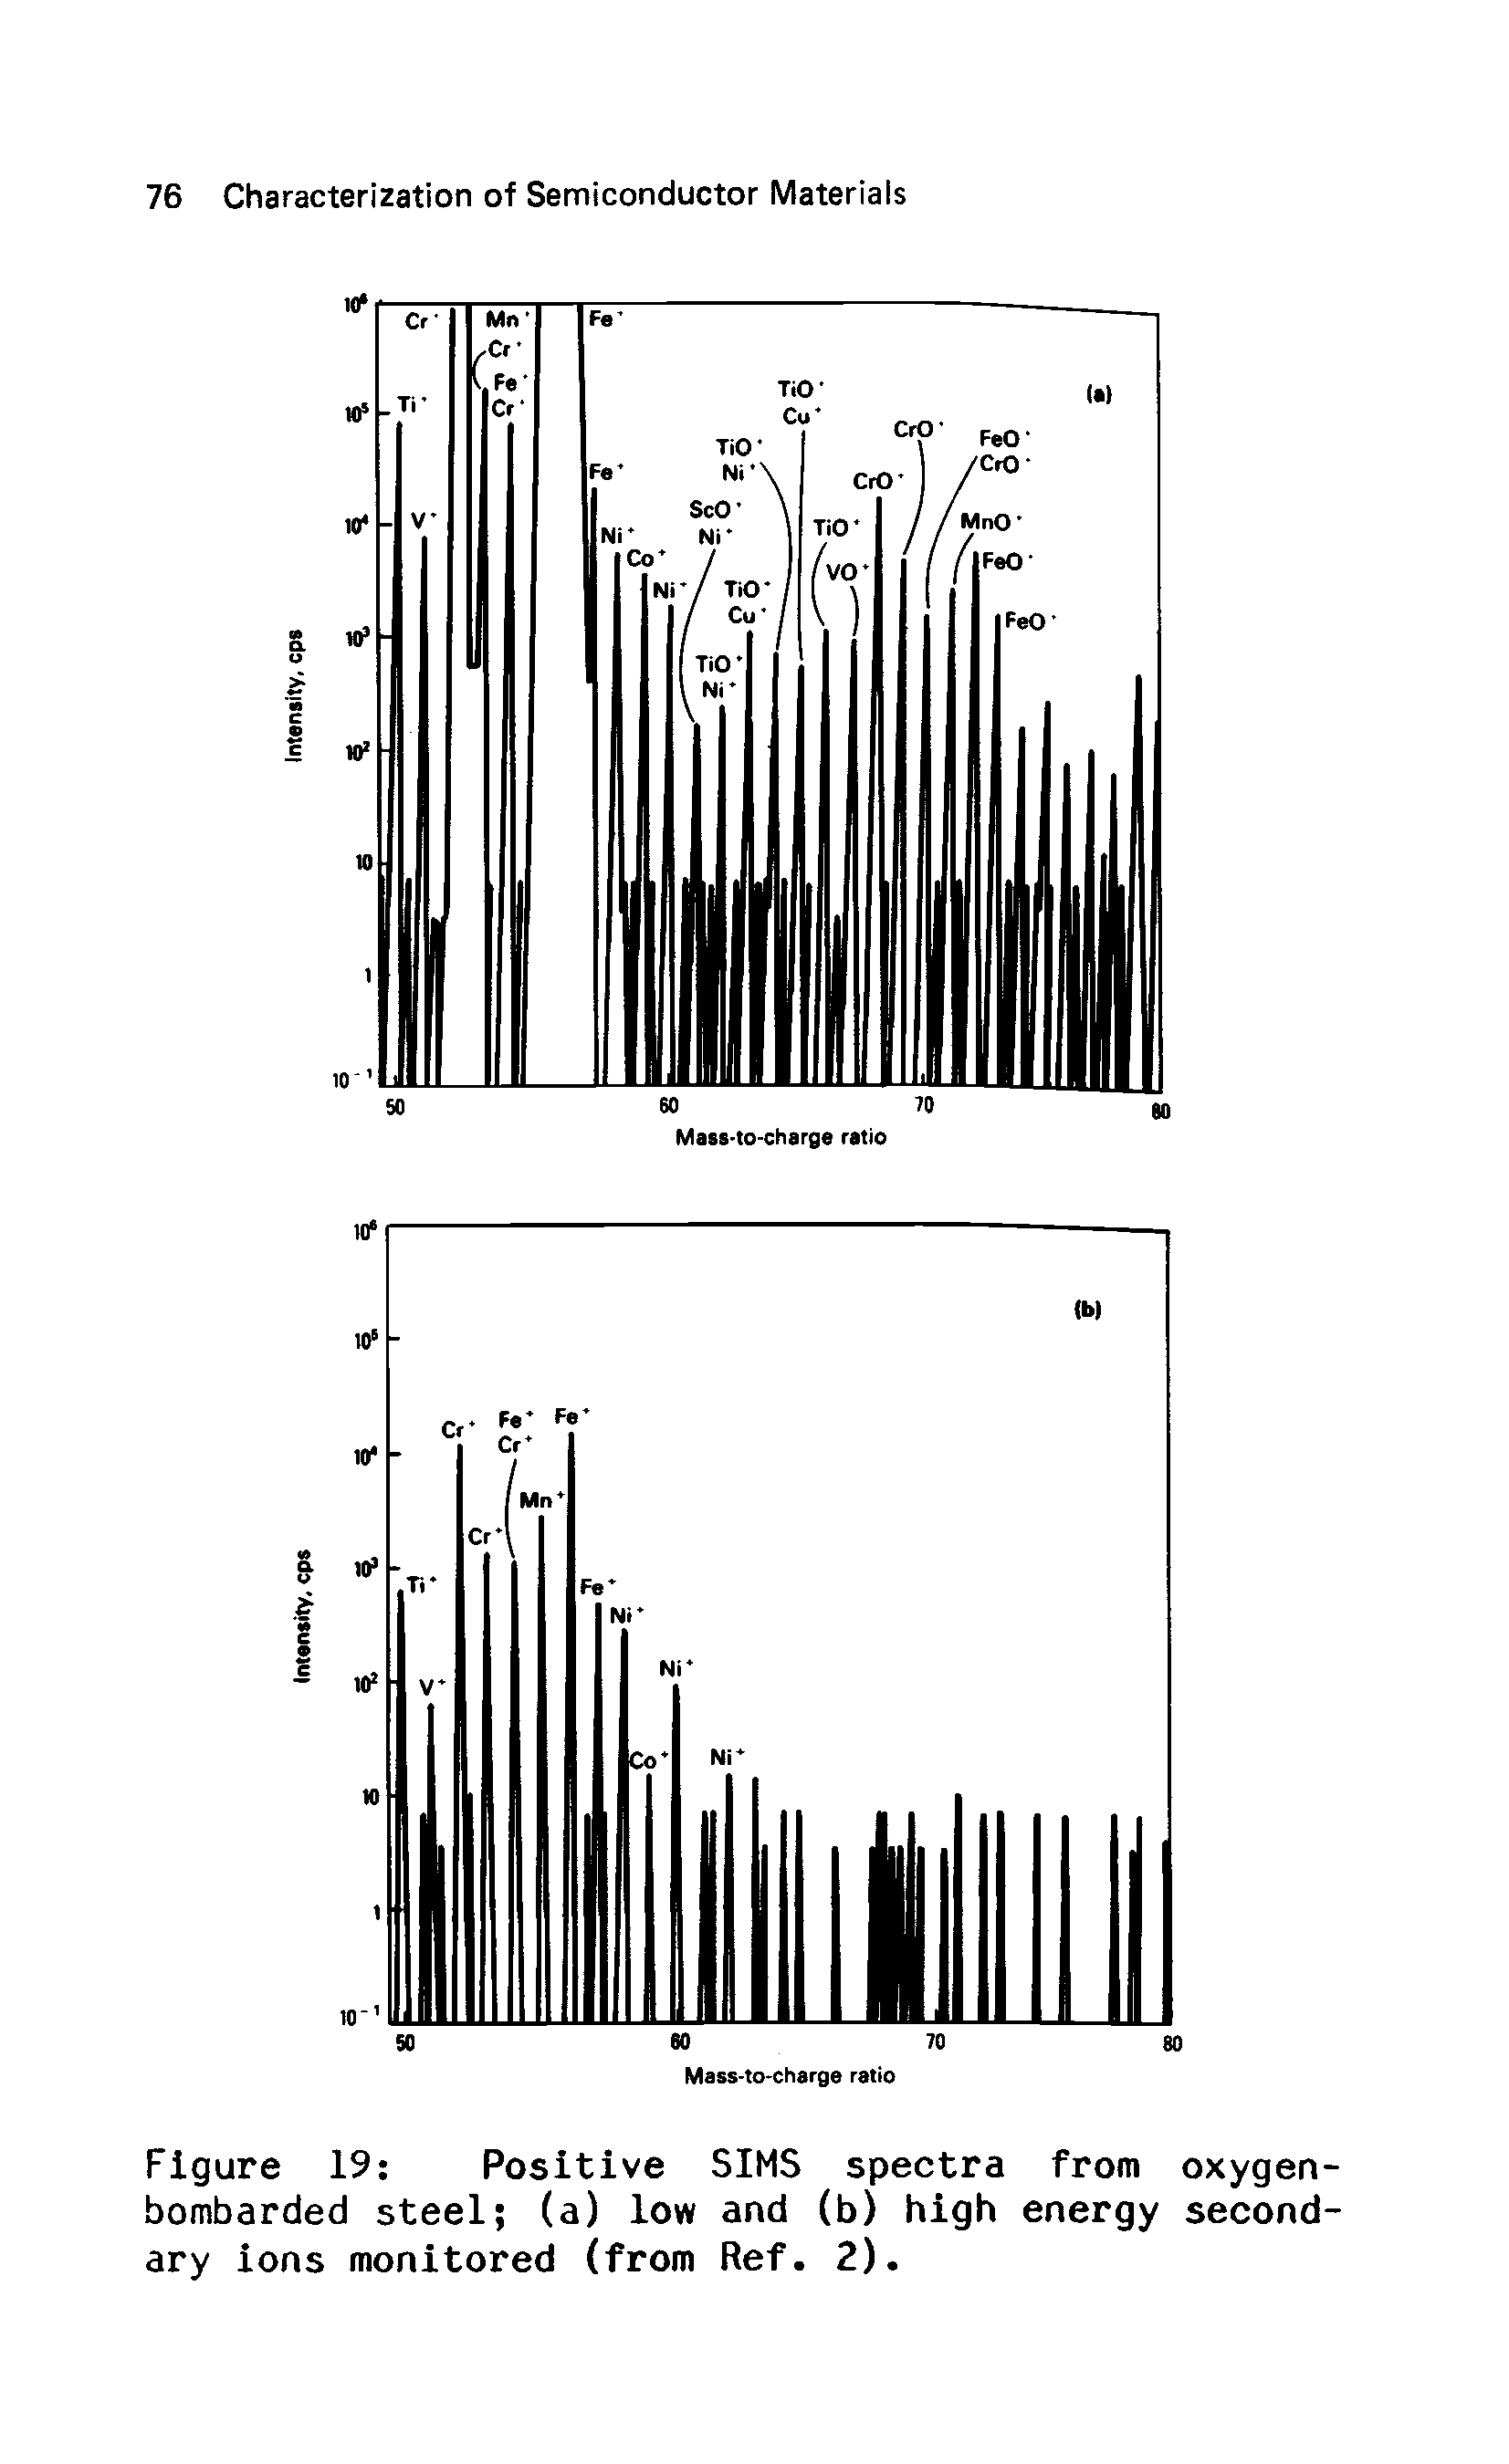 Figure 19 Positive SIMS spectra from oxygen-bombarded steel (a) low and (b) high energy secondary ions monitored (from Ref. 2).